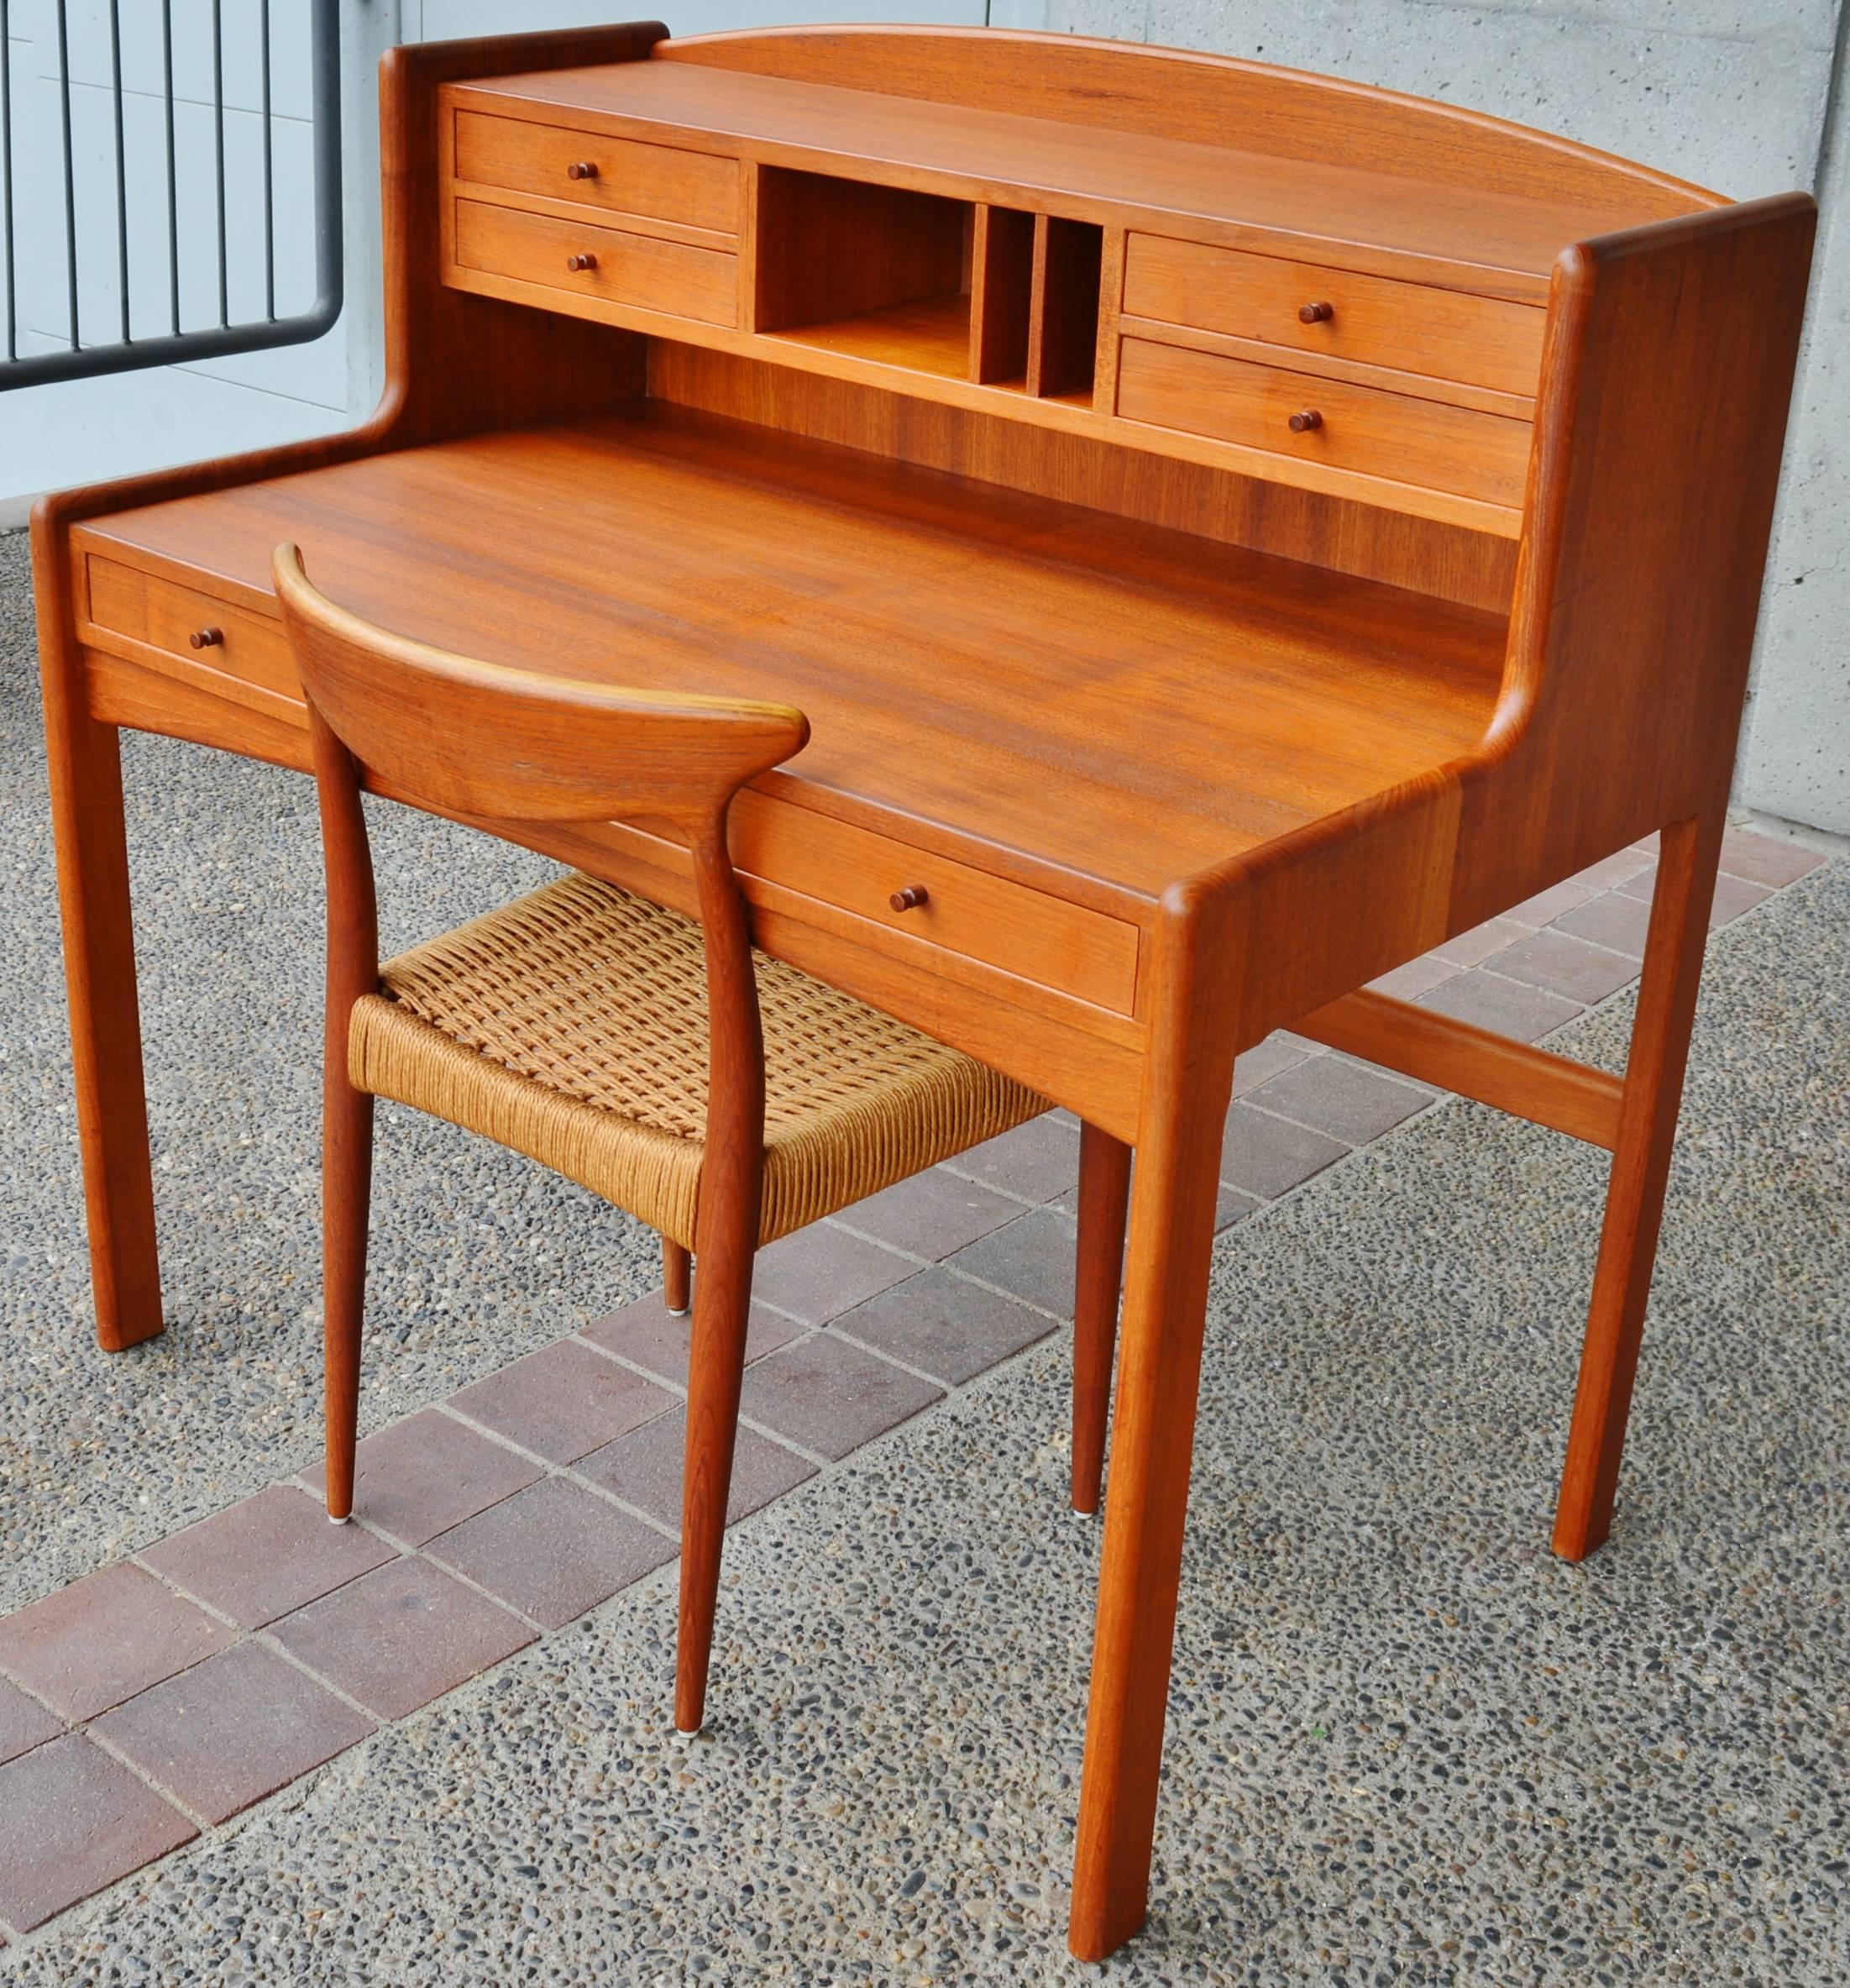 Mid-20th Century Solid Teak Desk / Sales Counter with Finished Back Danish Modern